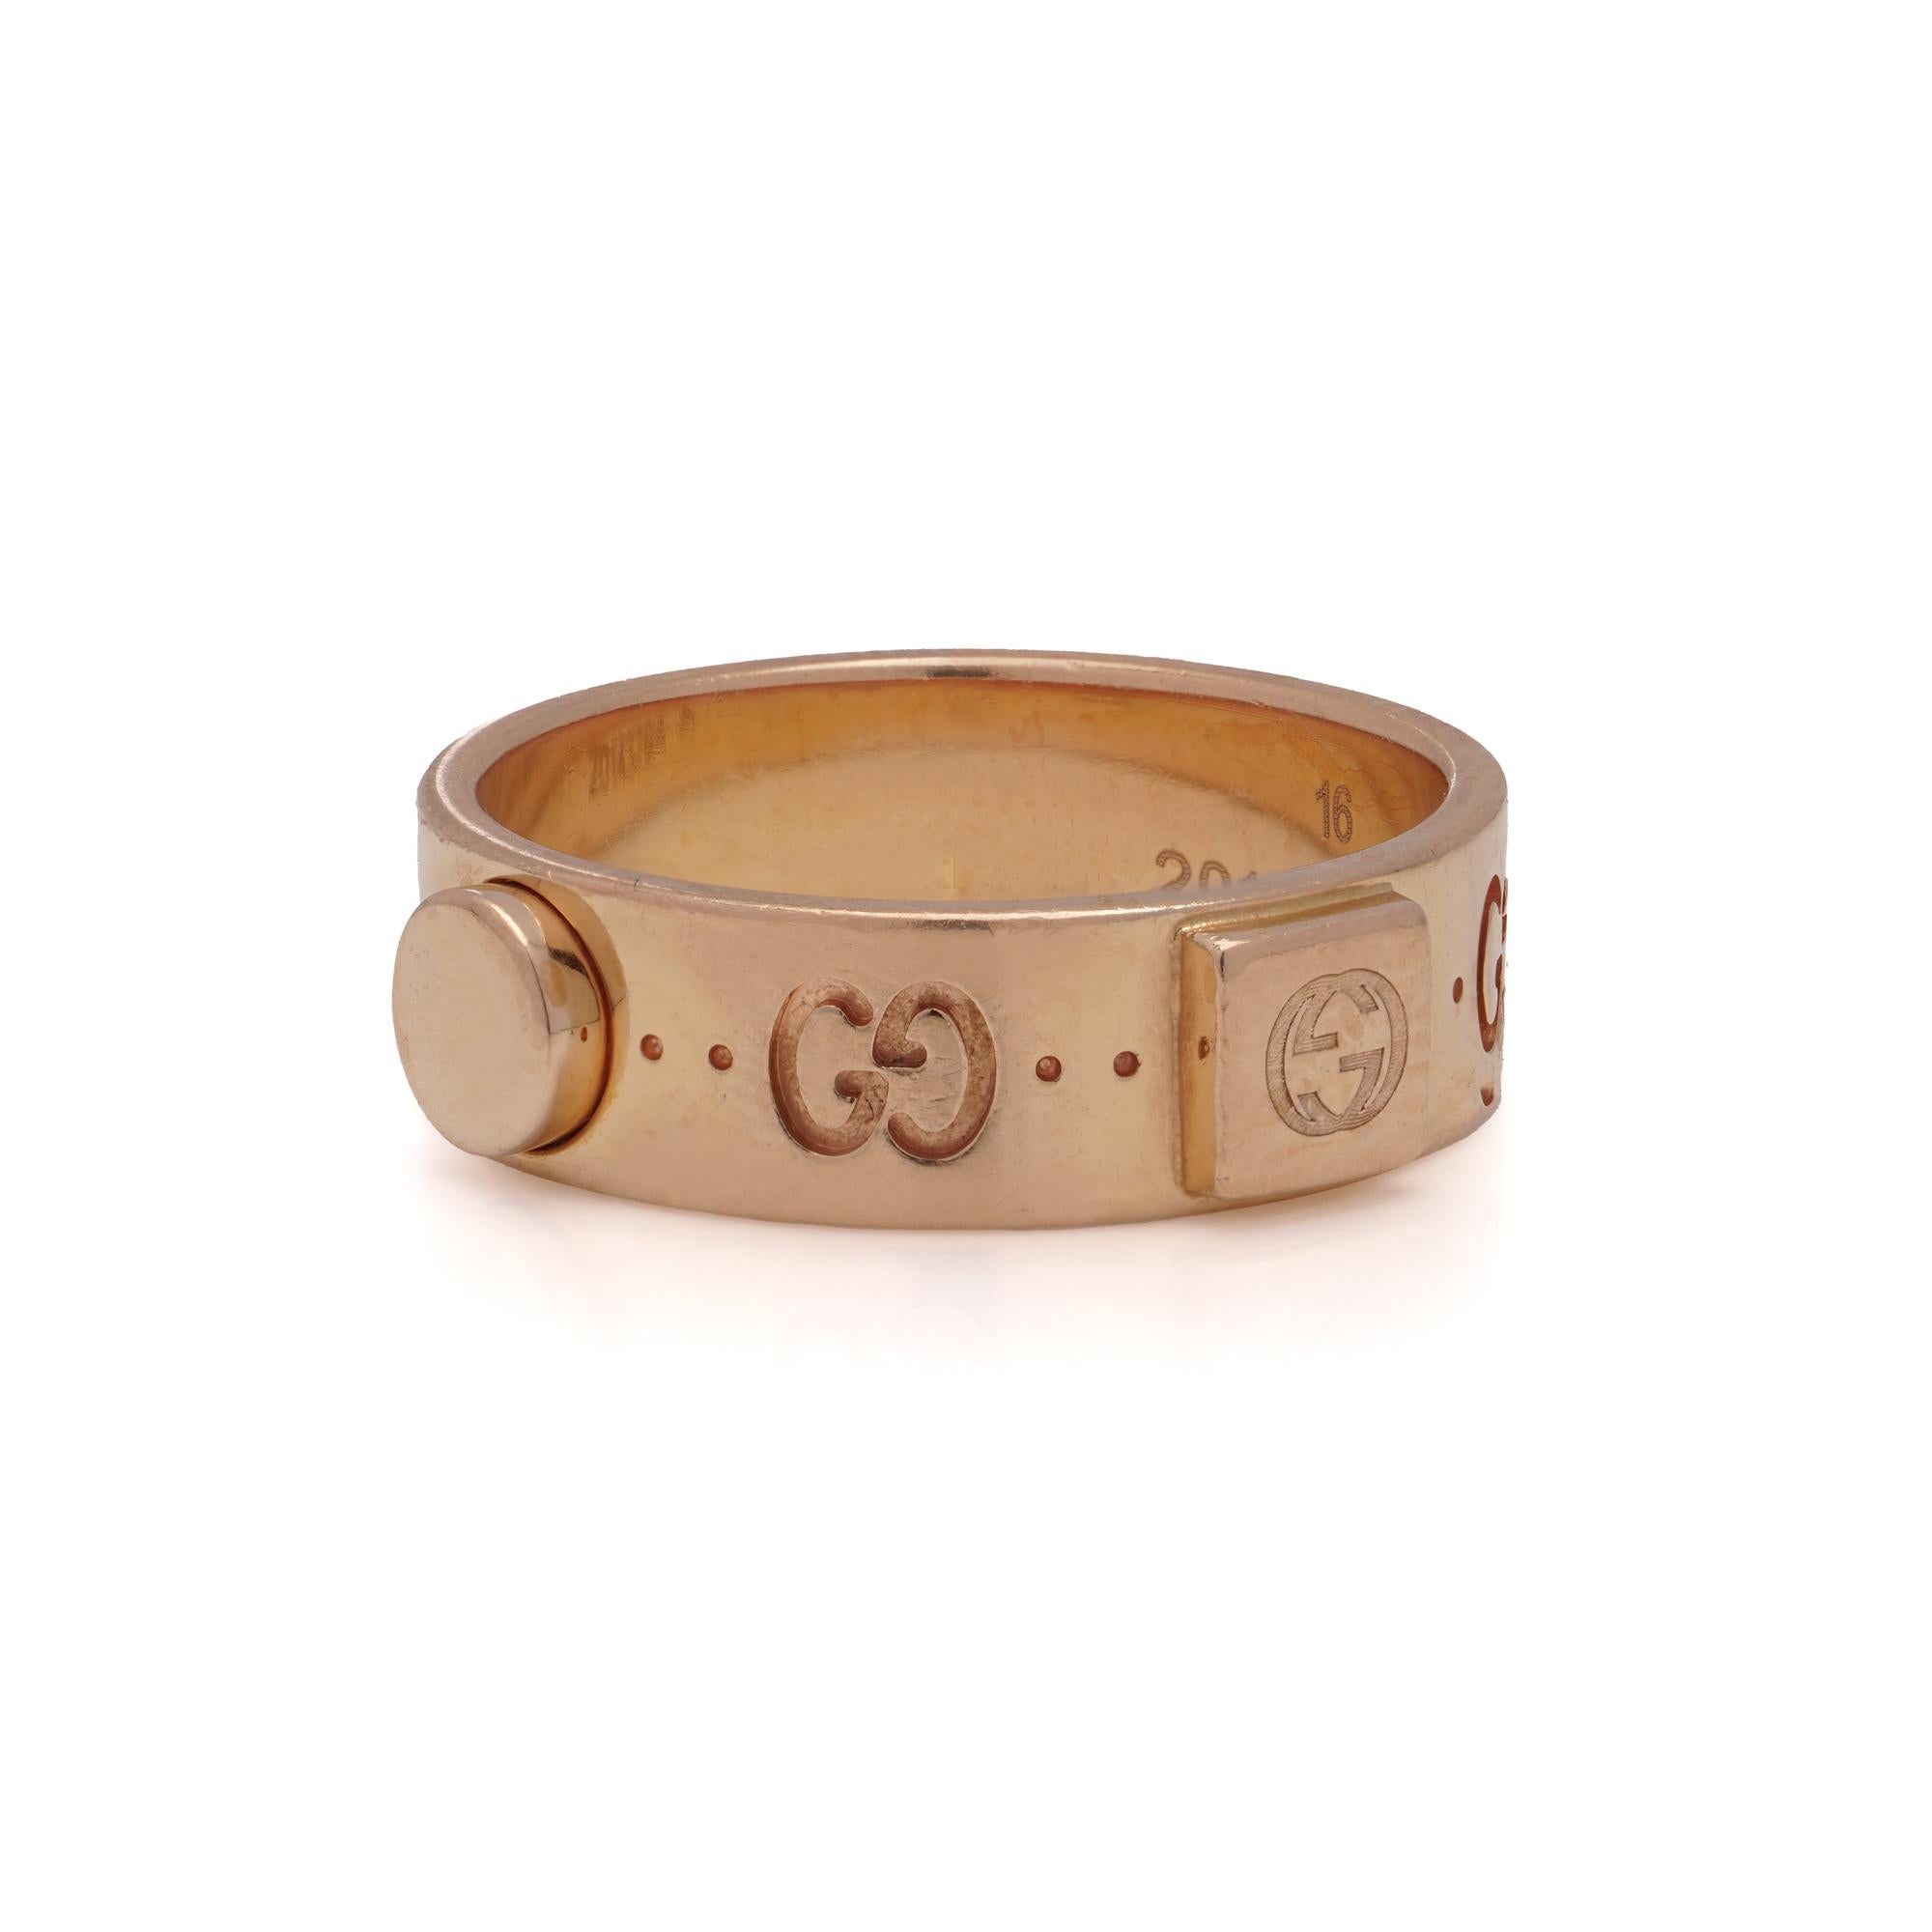 Gucci 18kt rose gold Iconic band ring with studs. 
Made in Italy
Maker: Gucci
Fully Hallmarked, Import mark of Switzerland. 

Dimensions -
Finger Size (UK) = P (US) = 8 EU) = 57
Weight: 8.00 grams in total 

Condition: The ring is pre-owned, with